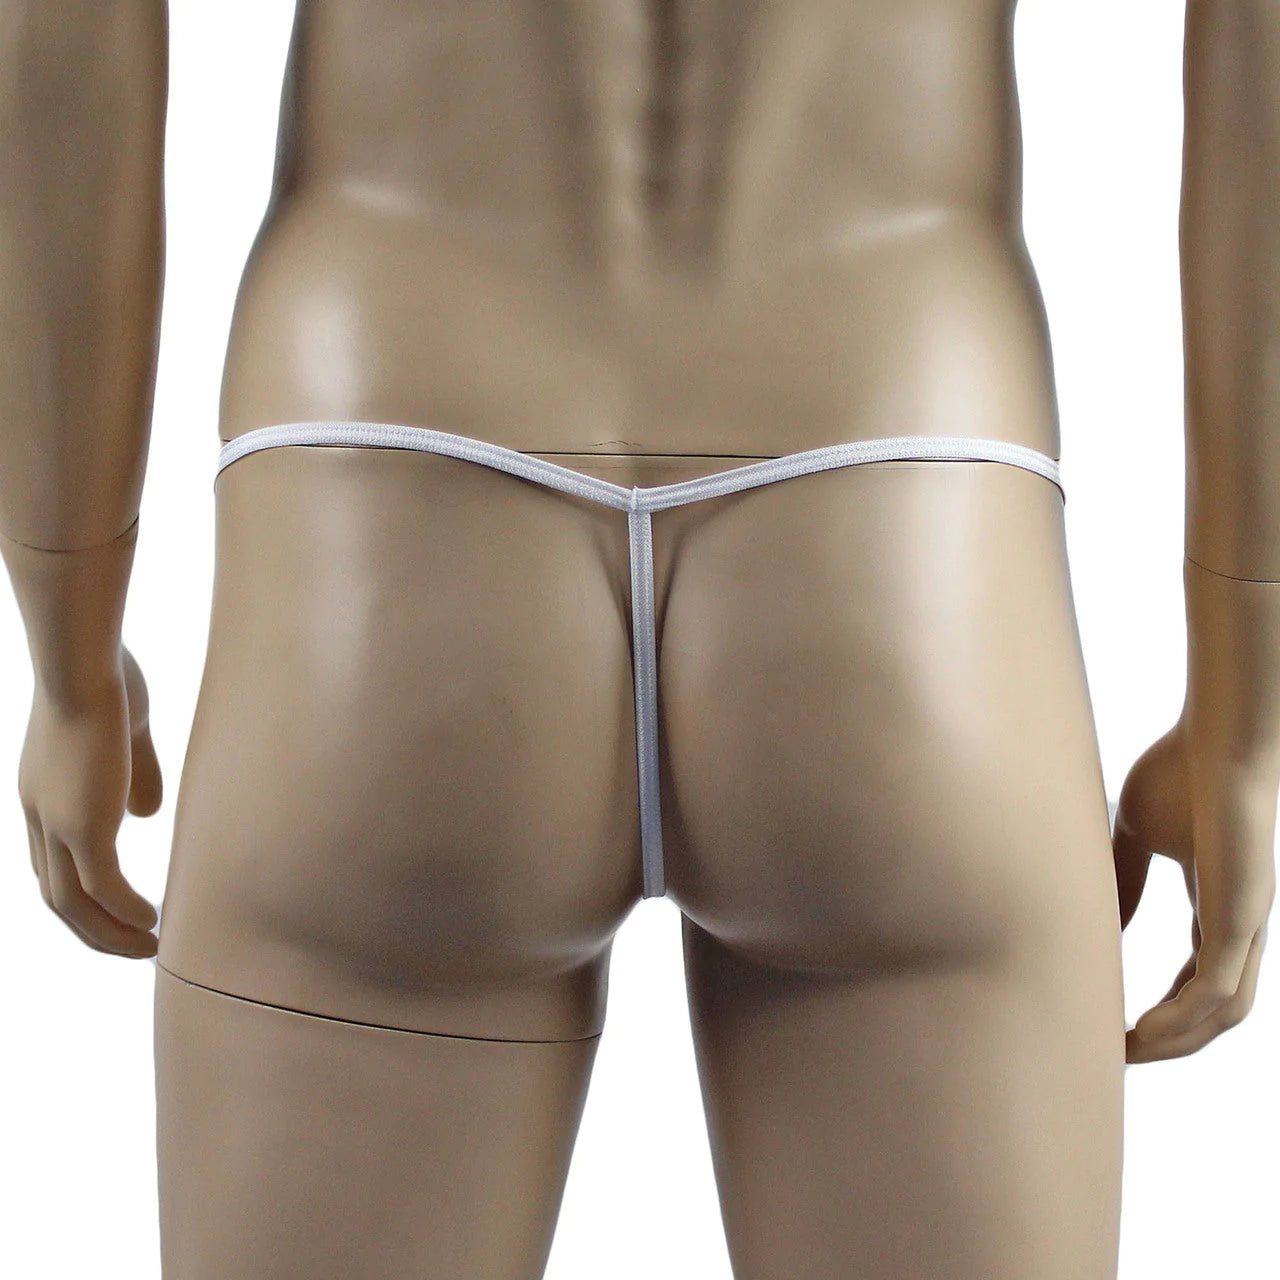 SALE - Mens Xmas Stretch Spandex Pouch G string with Merry Christmas Bow Red and White